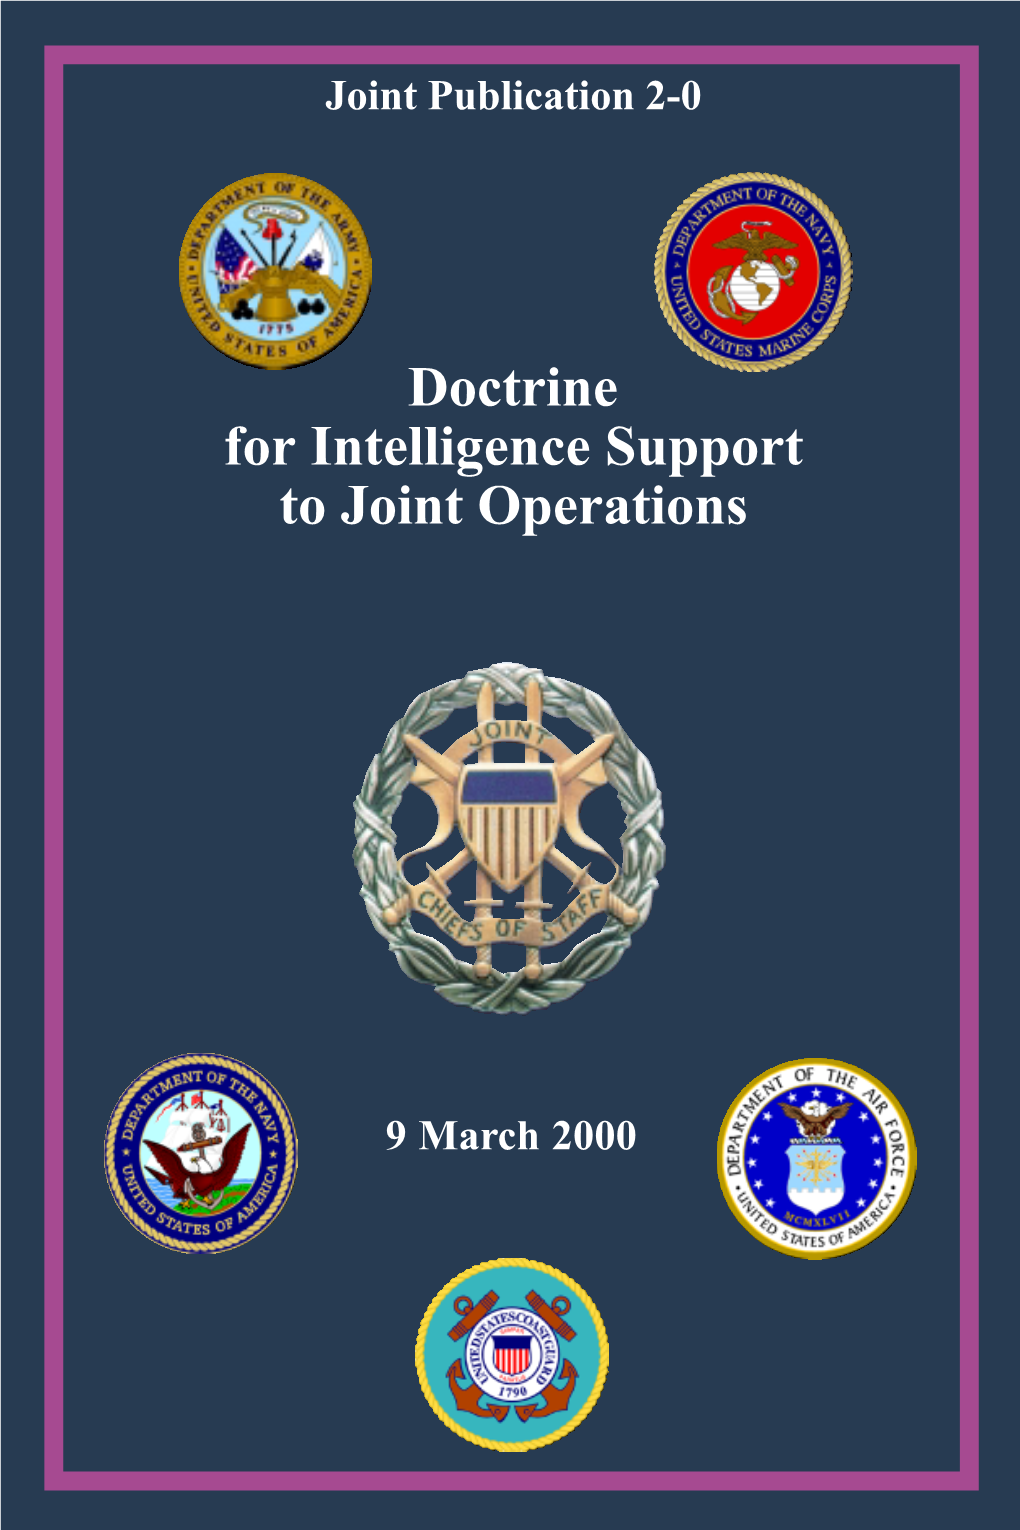 JP 2-0, "Doctrine for Intelligence Support to Joint Operations"